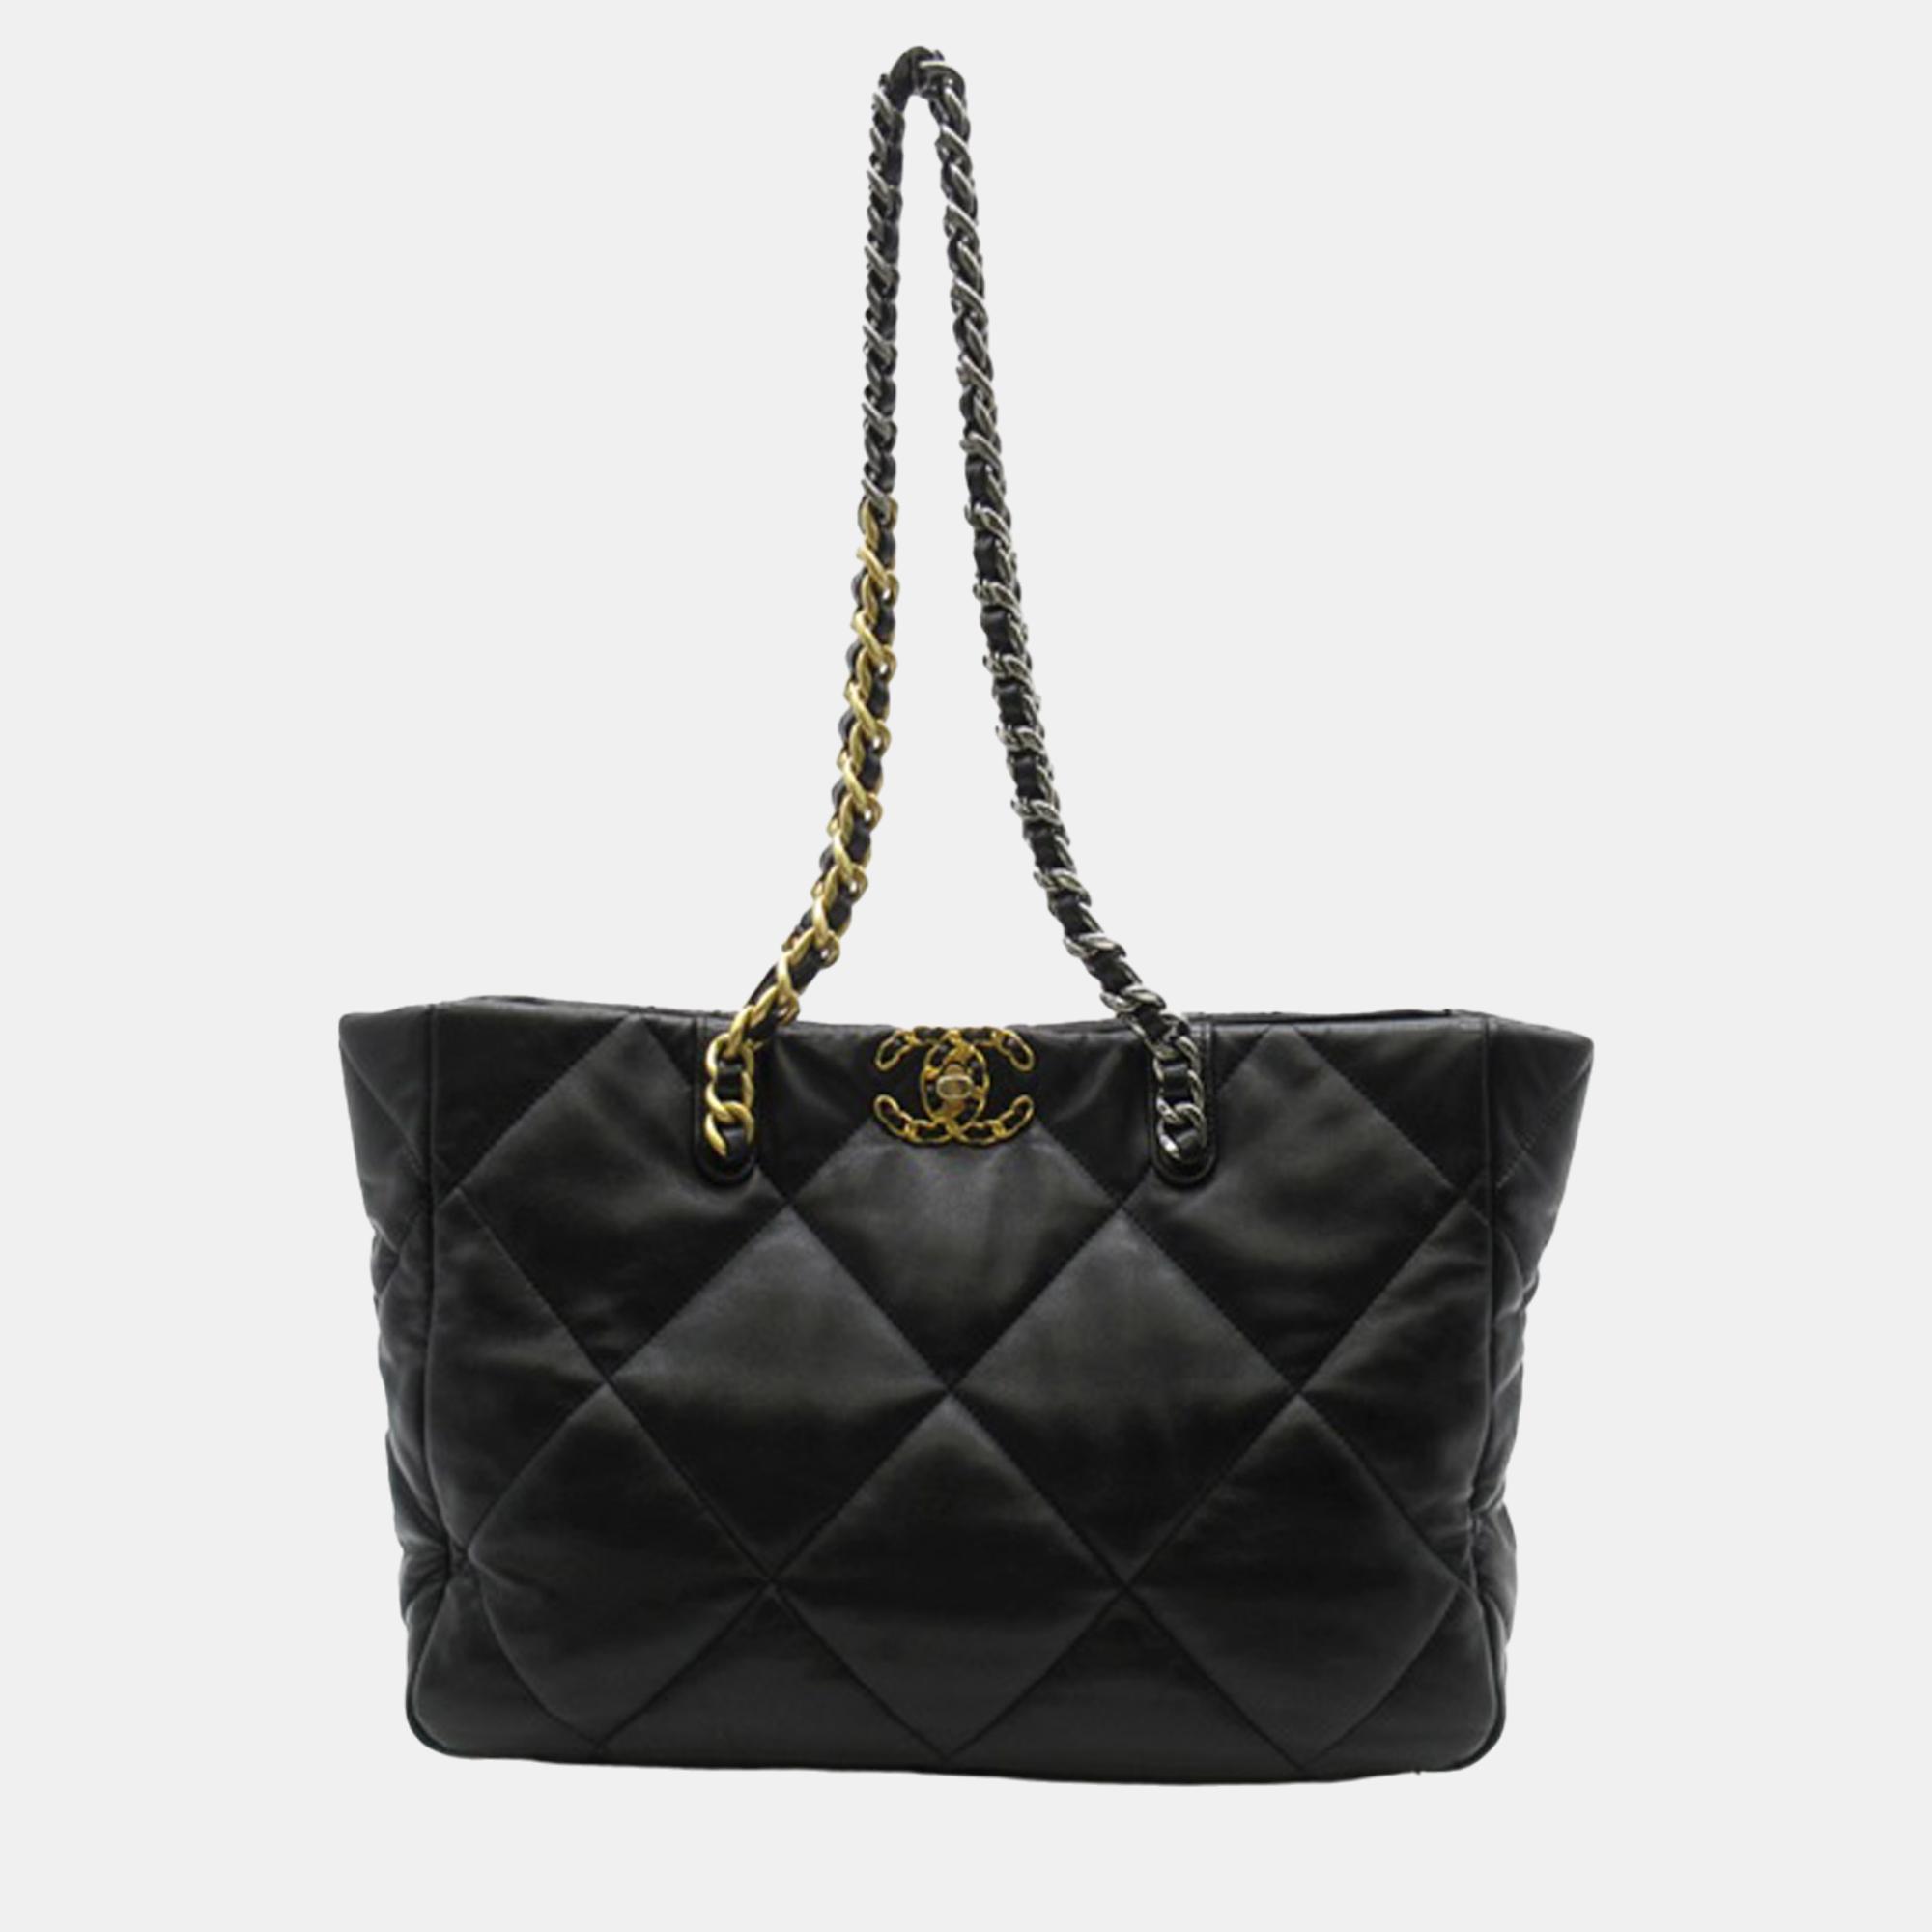 Pre-owned Chanel Black 19 Lambskin Shopping Tote